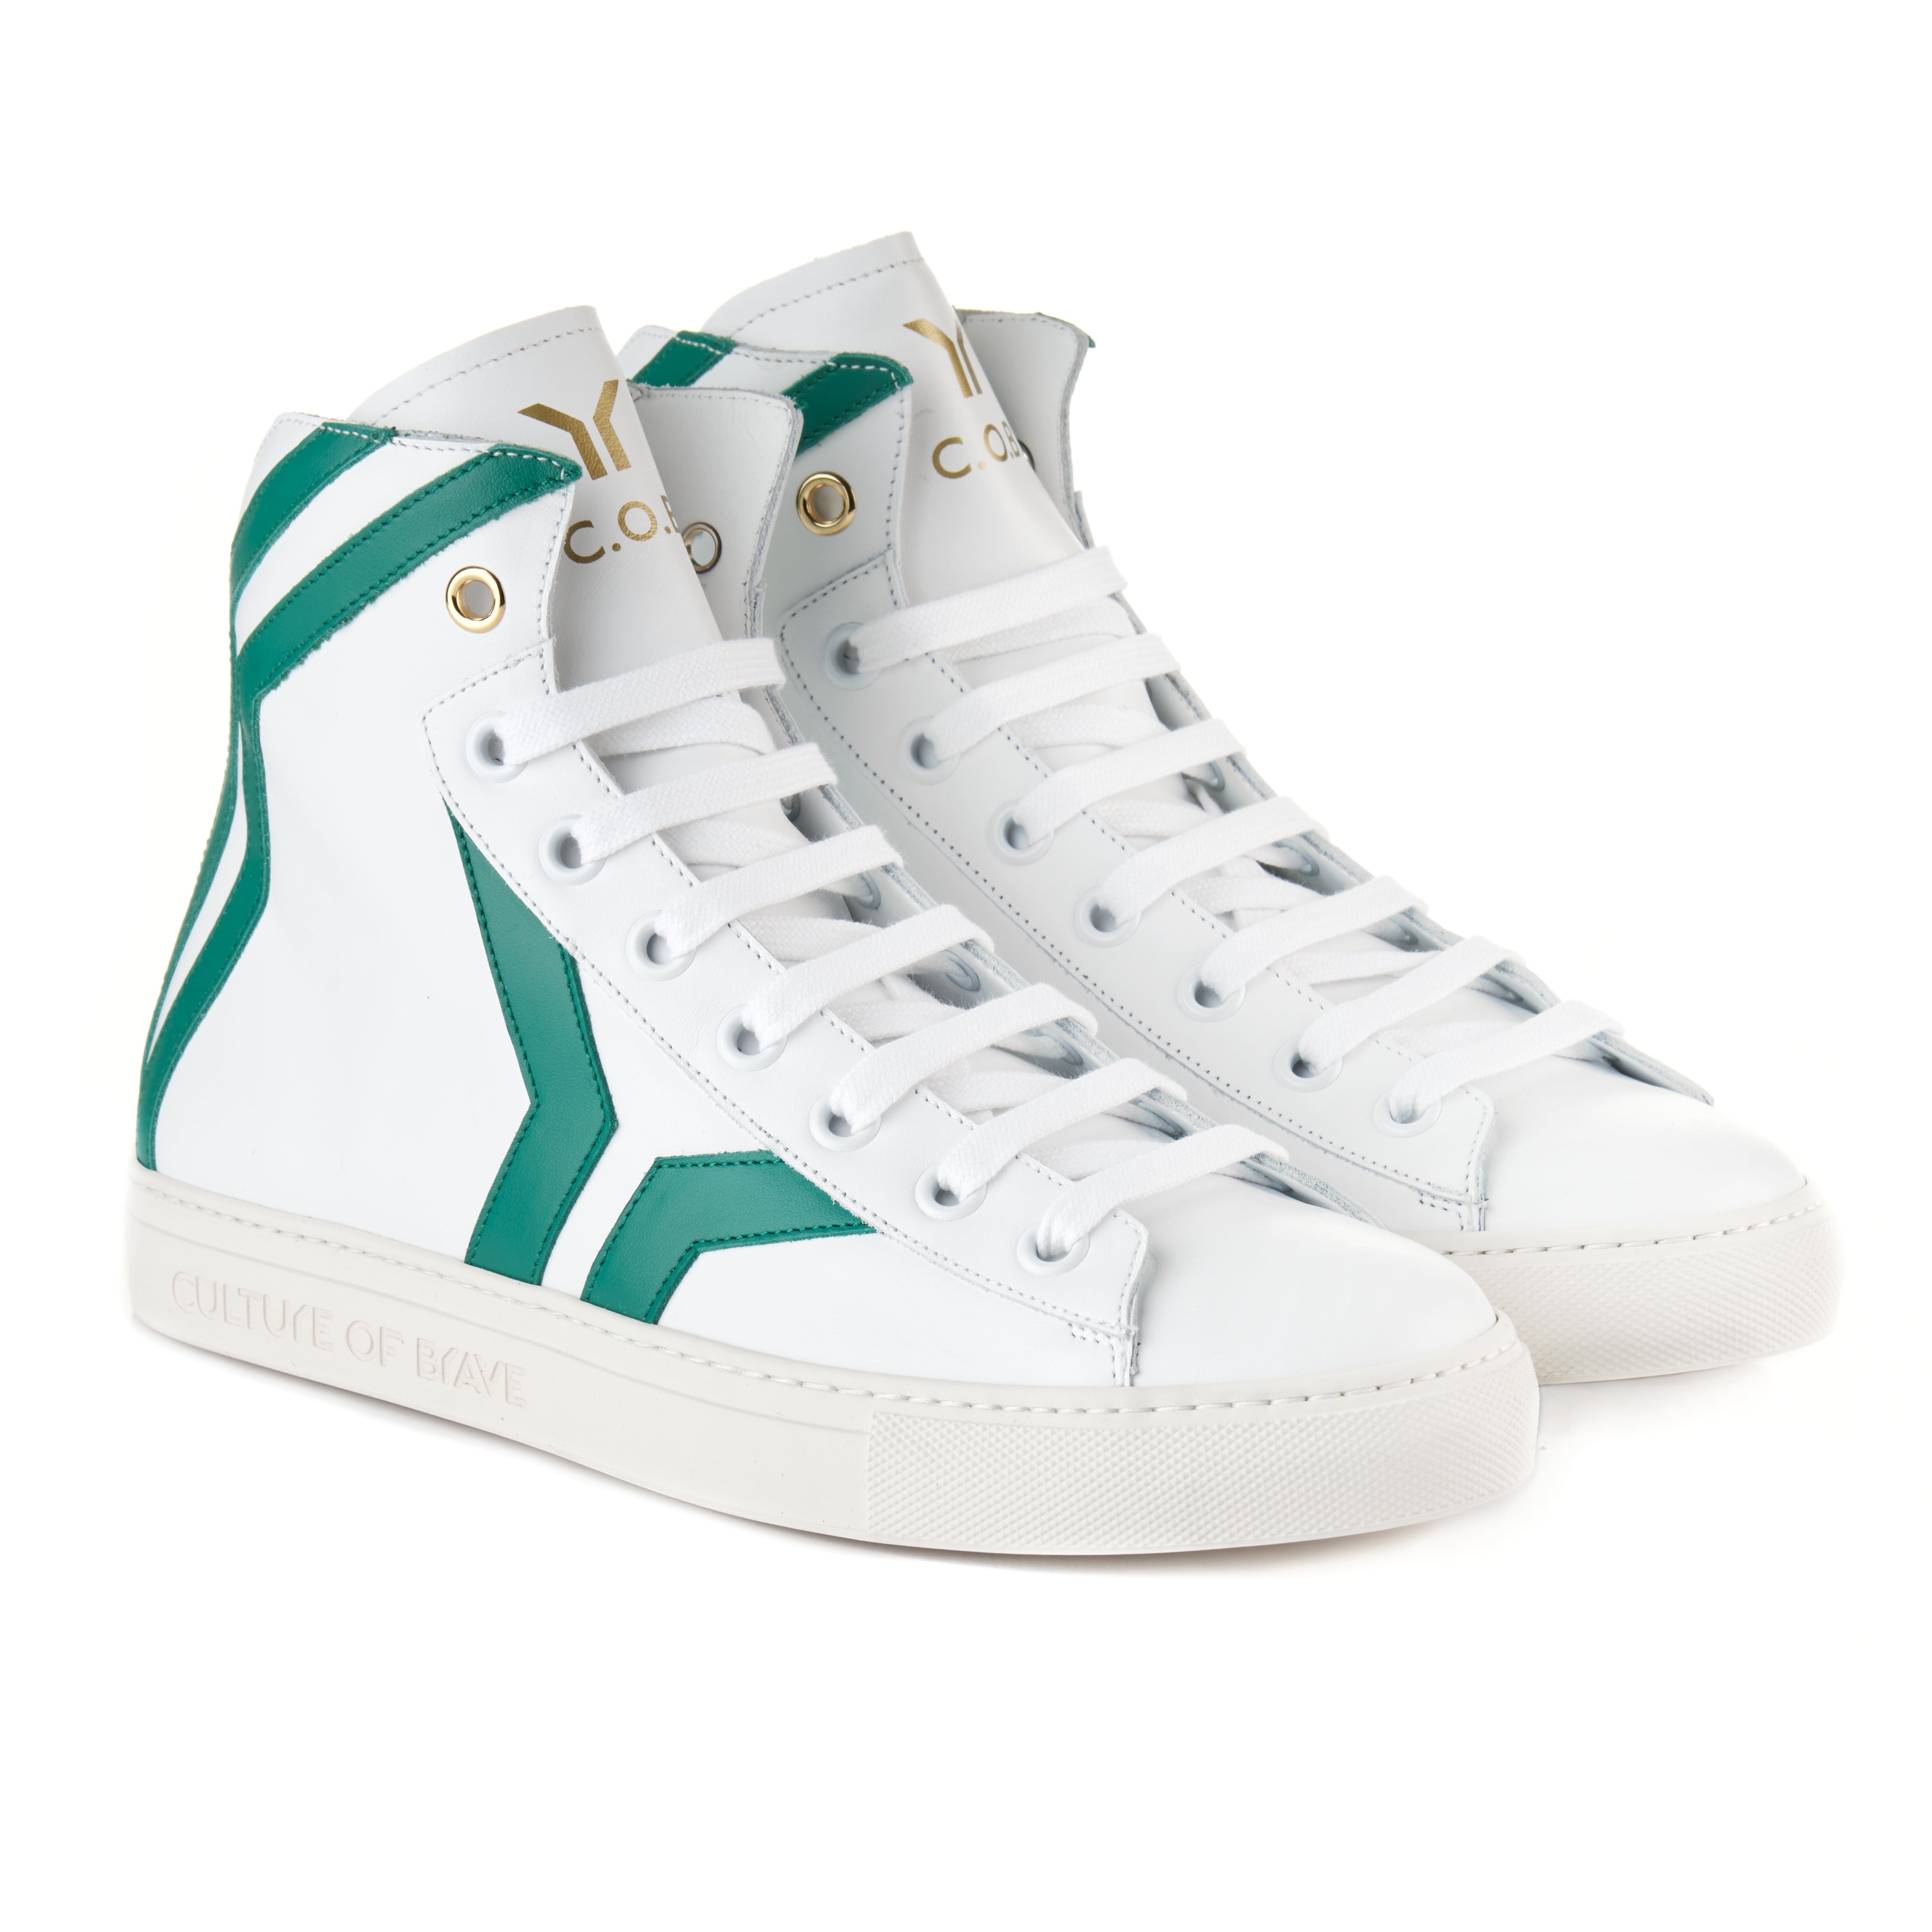 Resilient S16 Men White leather green wing mid cut